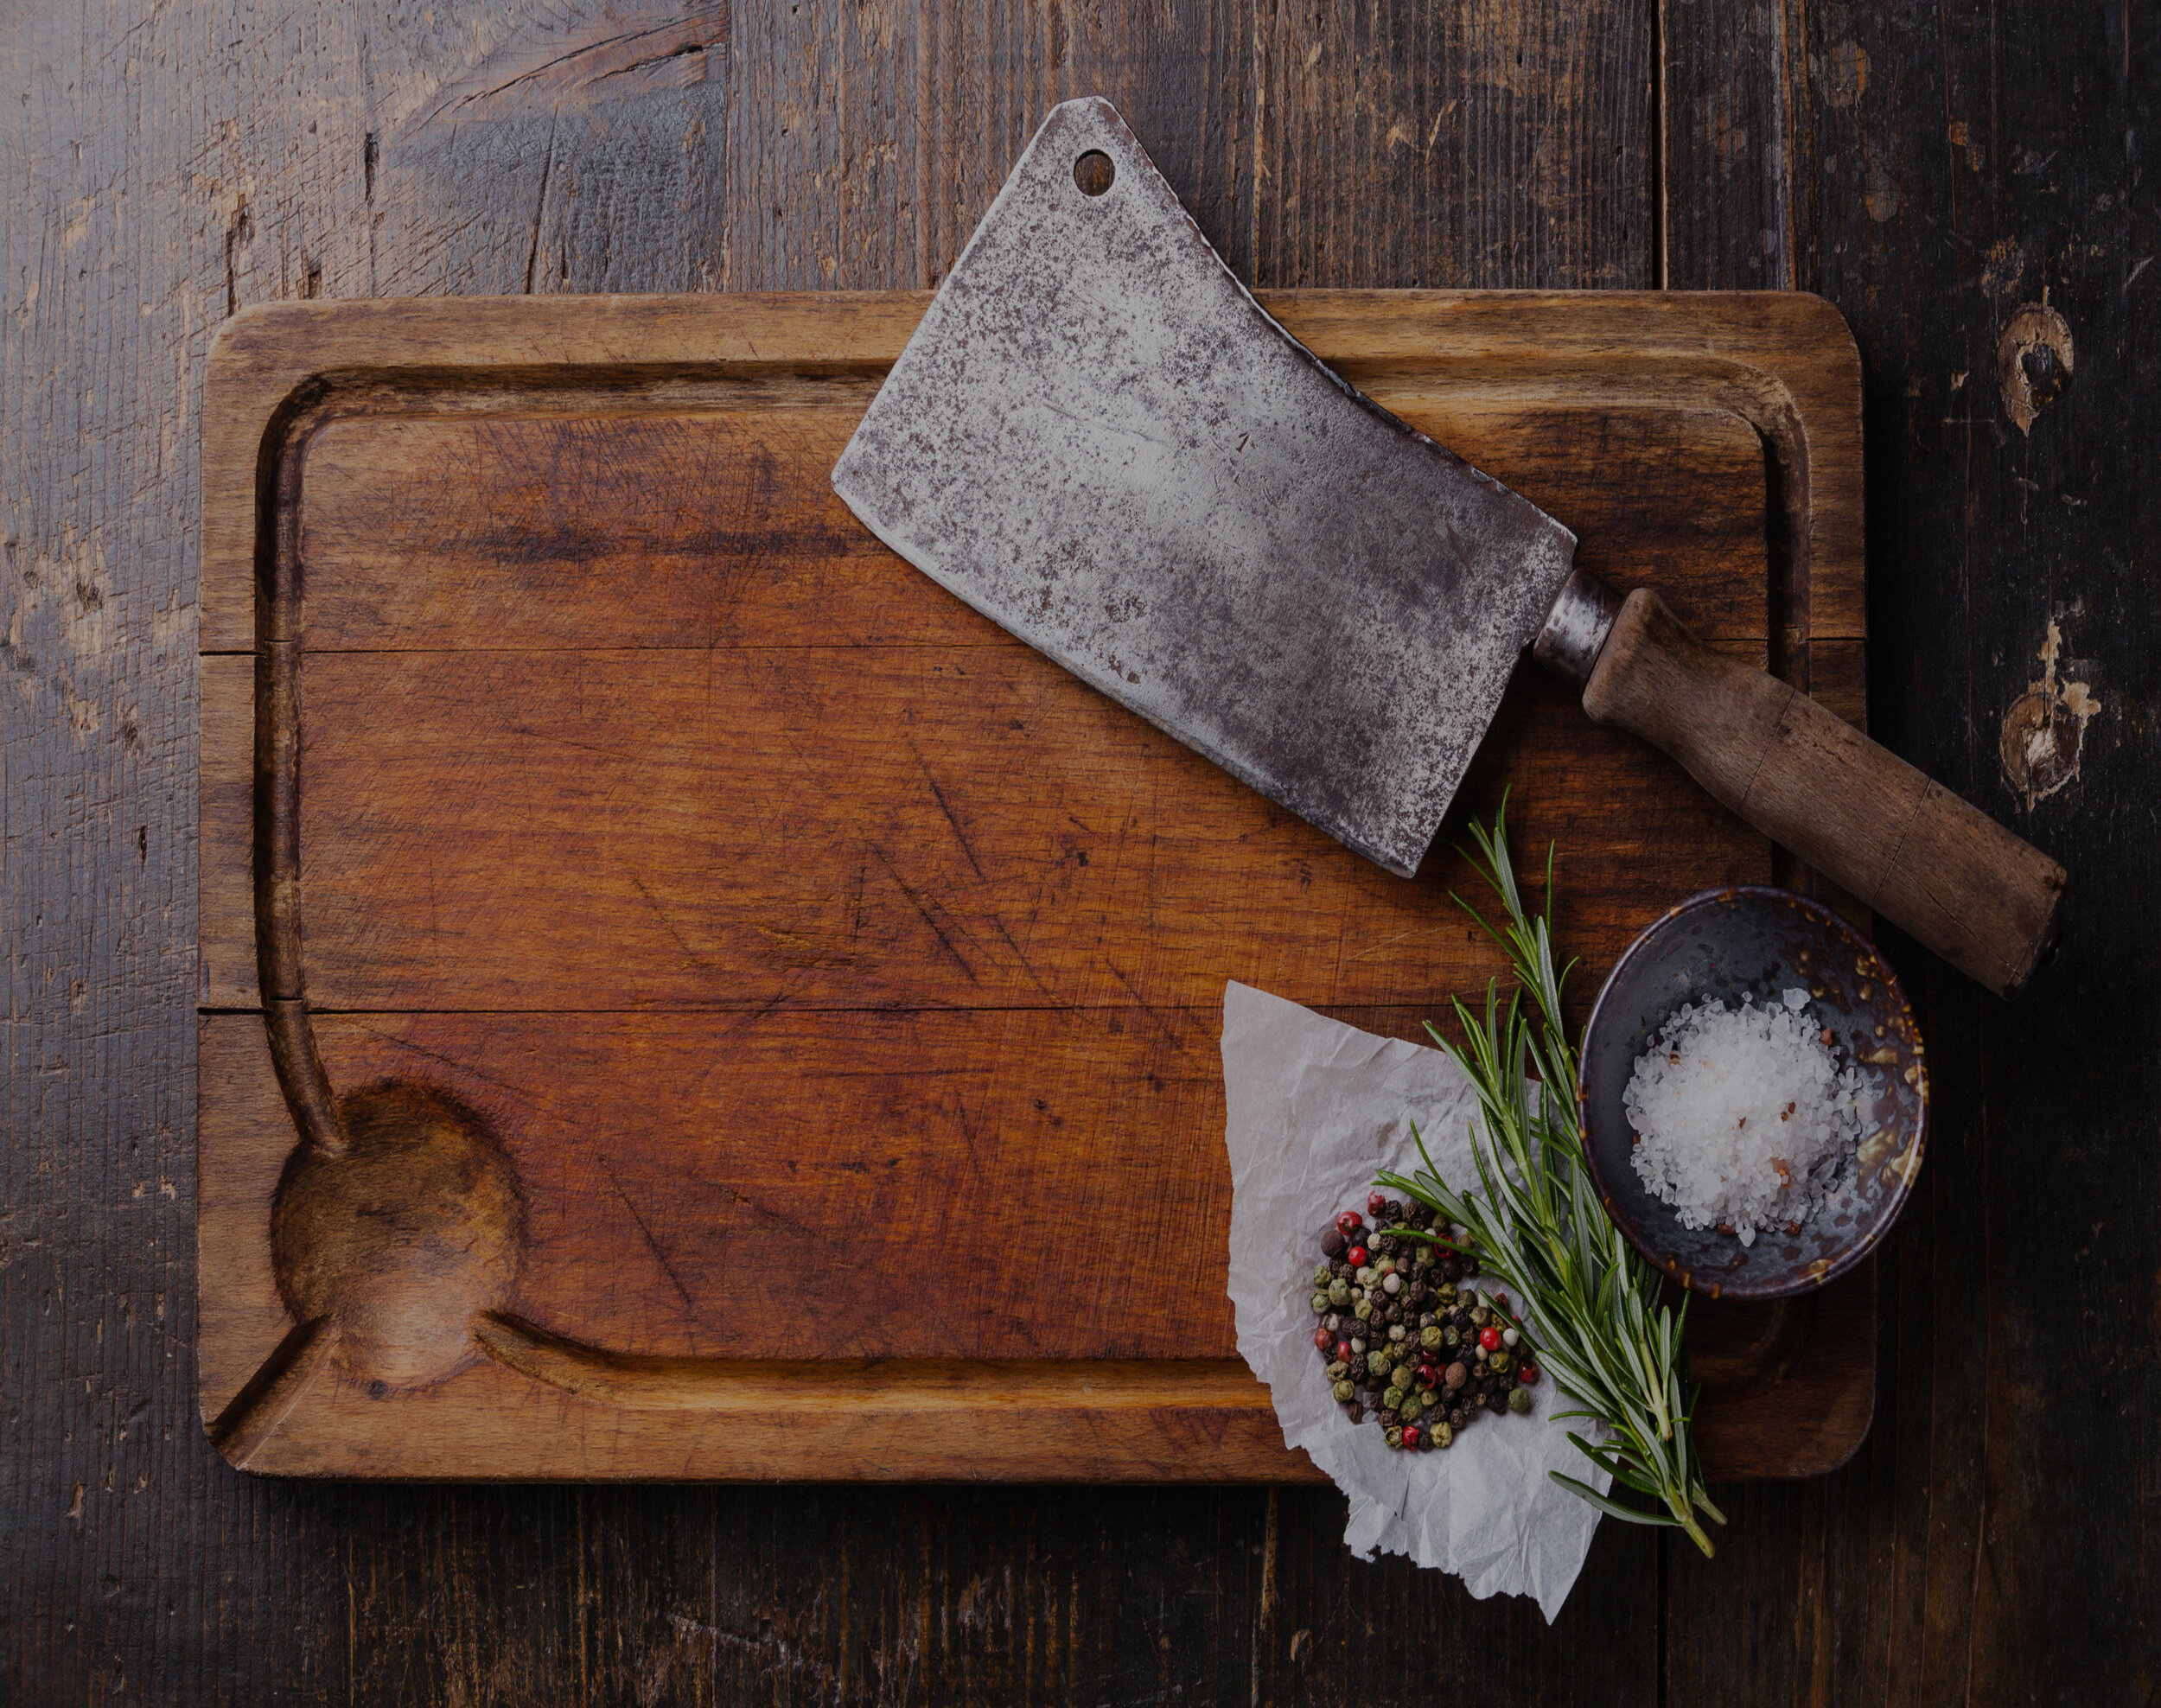 Chopping board, seasonings and meat cleaver on dark wooden background